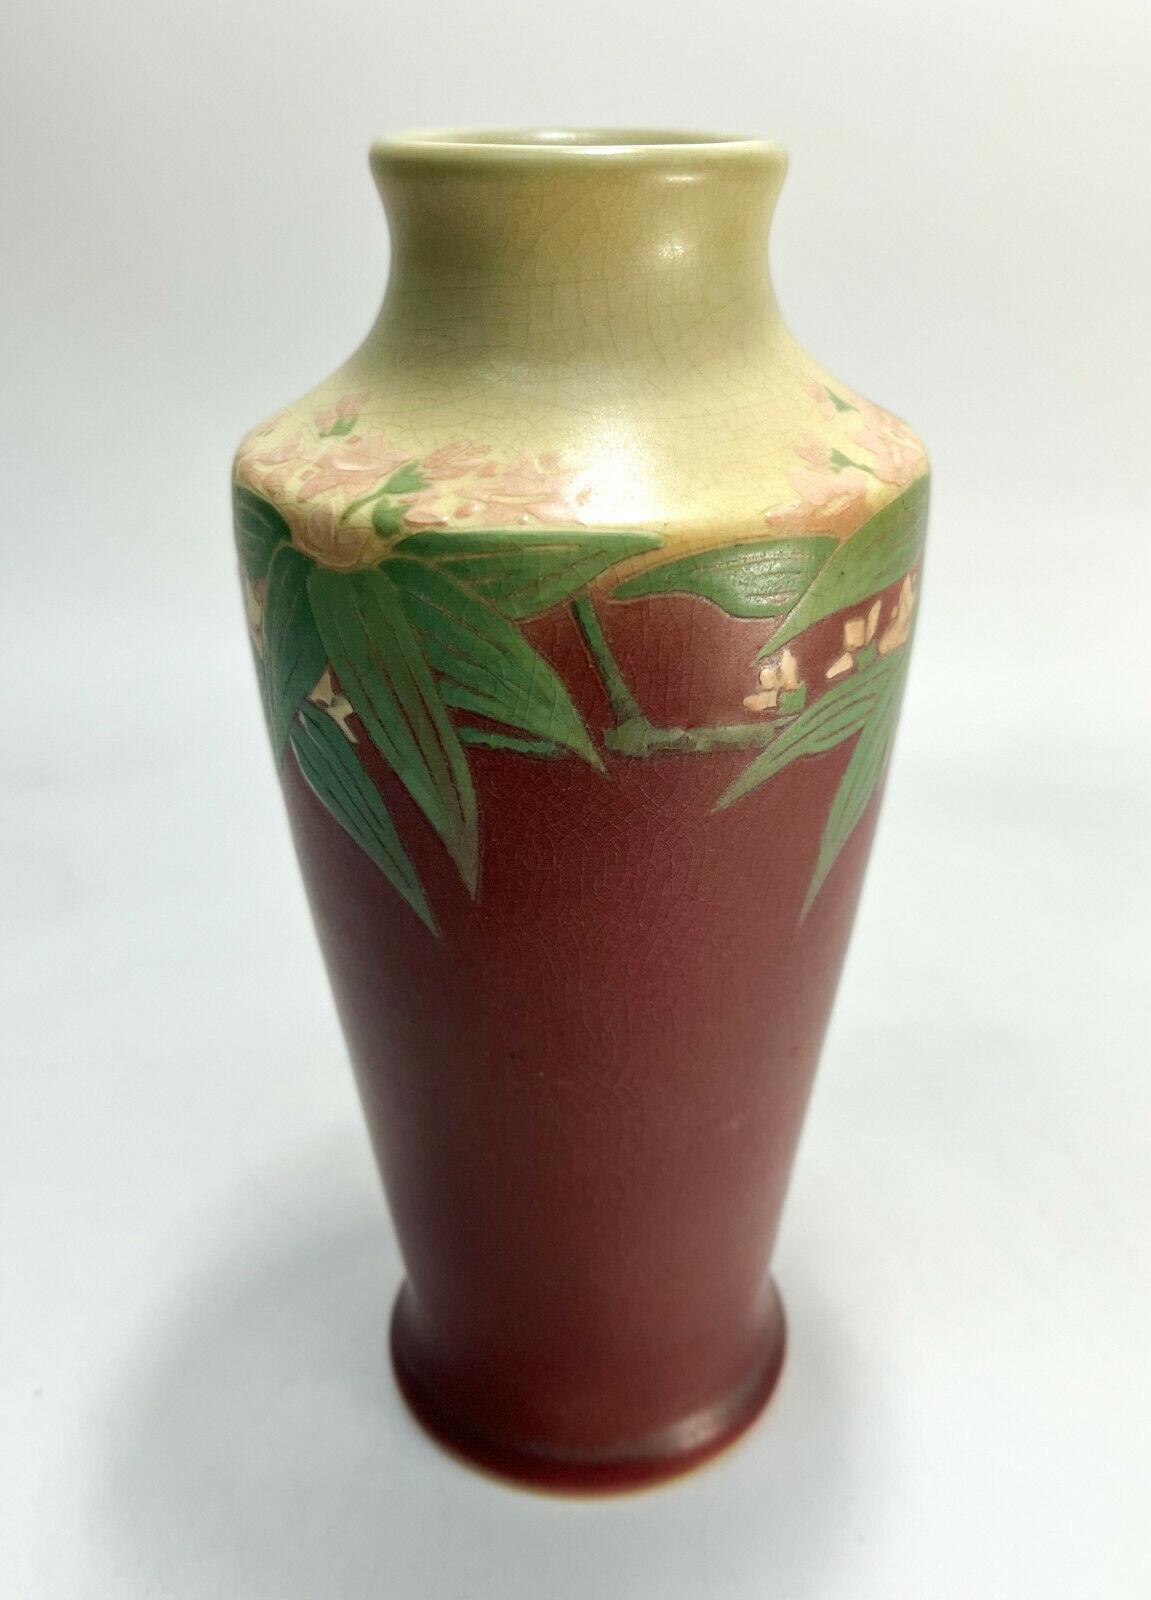 Rookwood Pottery Vellum Porcelain Vase #1920 by Lorinda Epply, 1912

A cream and berry red ground with florals to the circular band. Rookwood mark to the underside with maker mark initals for Lorinda Epply.

Additional information:  
Production